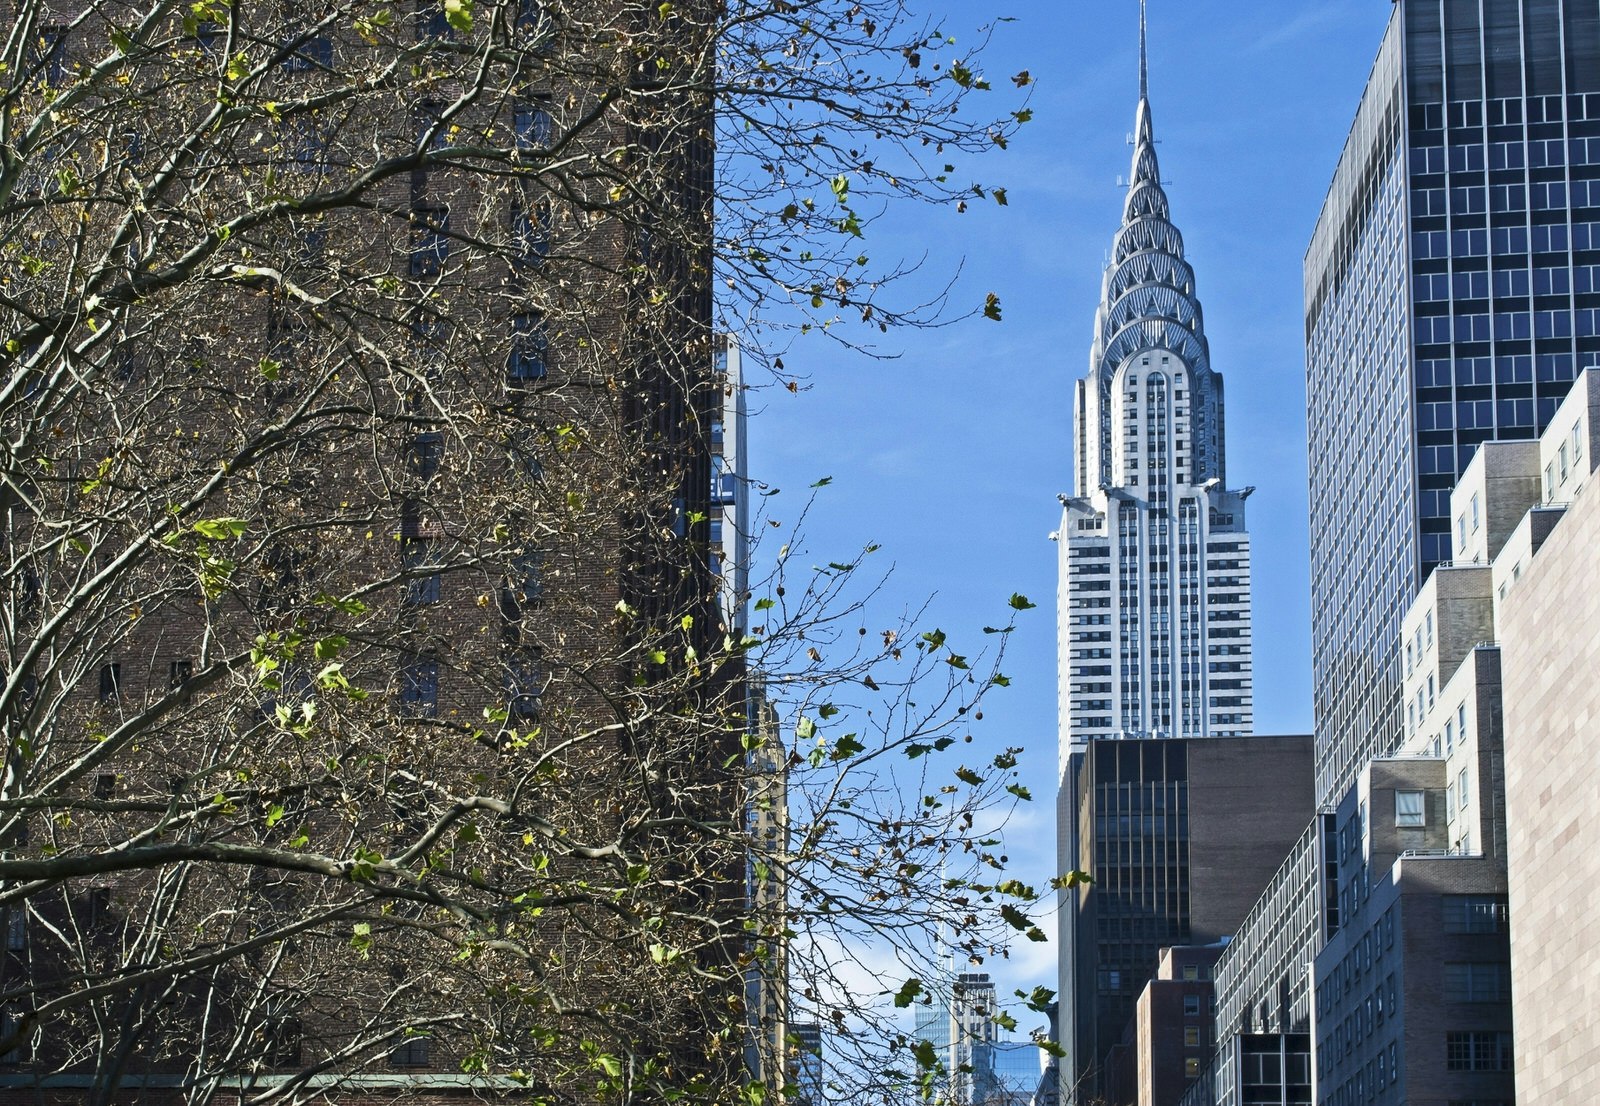 The left of the picture is dominated by a brick building lurking behind a tree that is shedding its leaves; in the right of the image the Chrysler Building rises dramatically into a blue sky, with its spire reaching up to the heavens